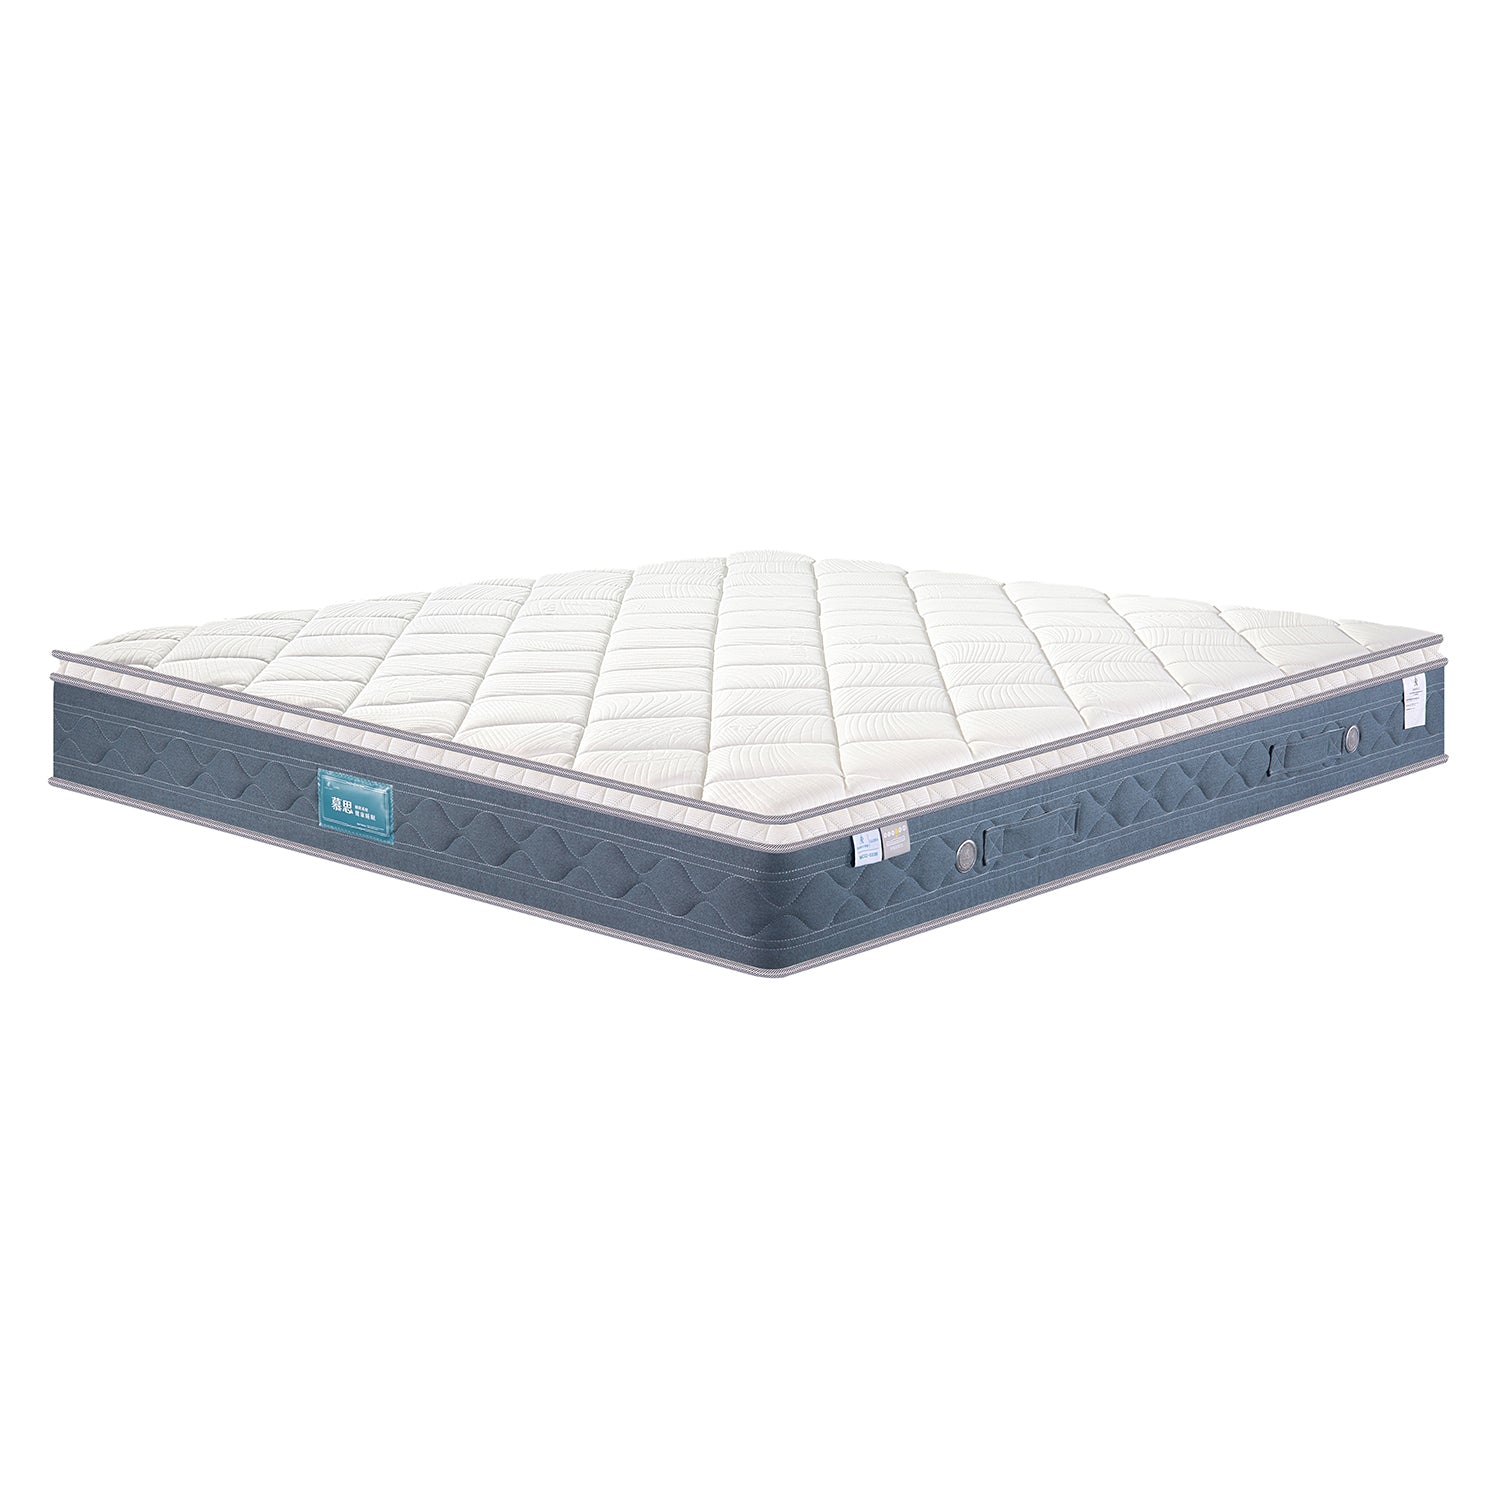 [Extra Firm] Double Side Layer Mattress MZZ4 - 033B